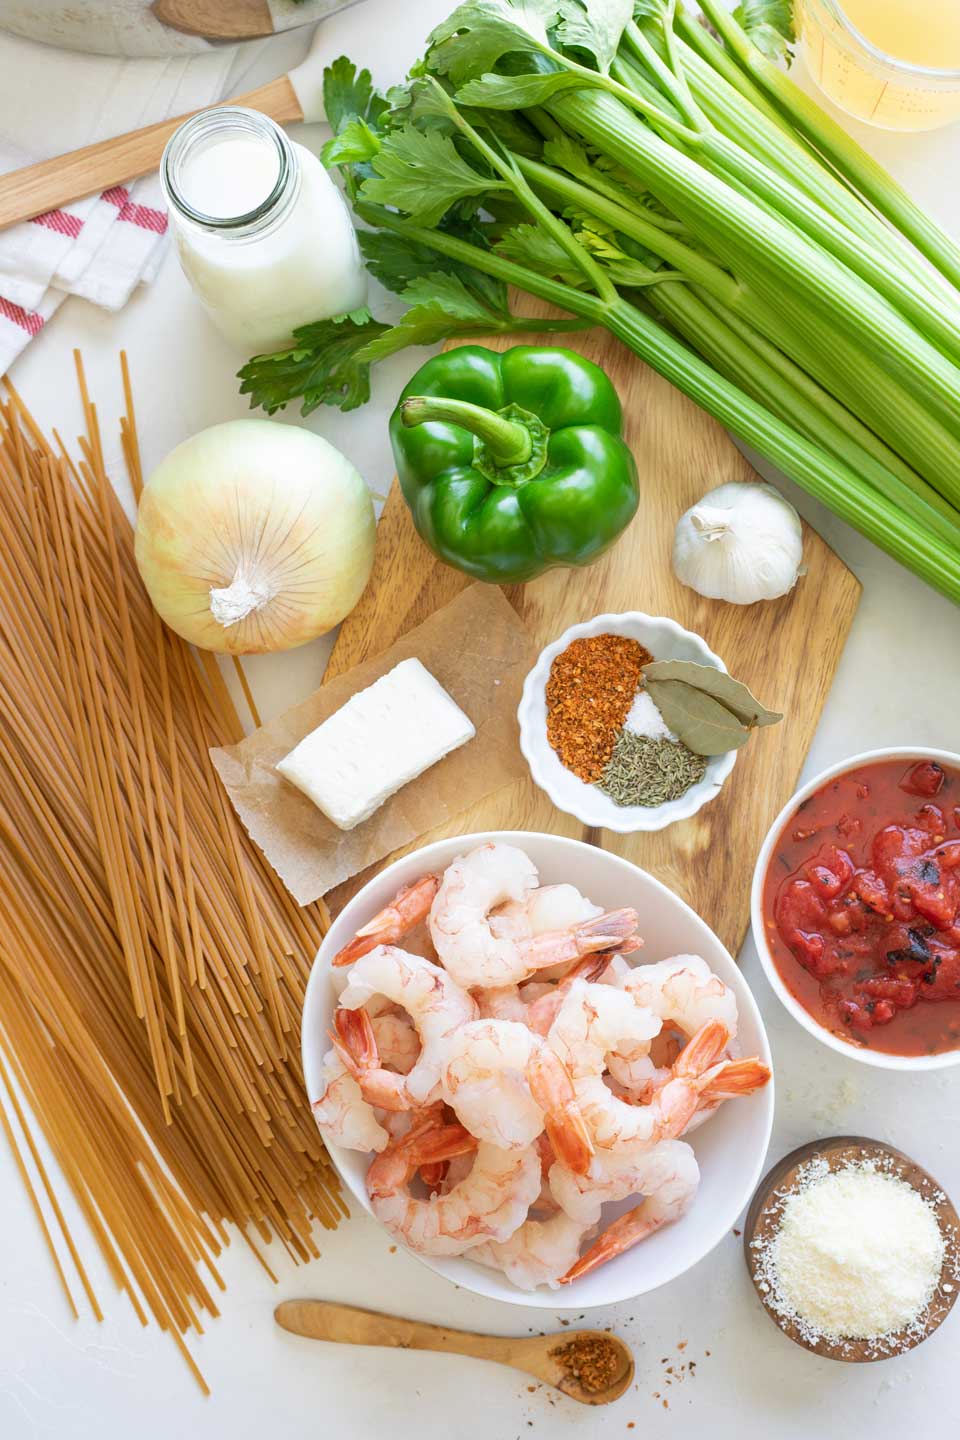 Overhead of ingredients, including raw shrimp in bowl, Cajun spices, dry pasta, and uncut veggies gathered on wooden cutting board.